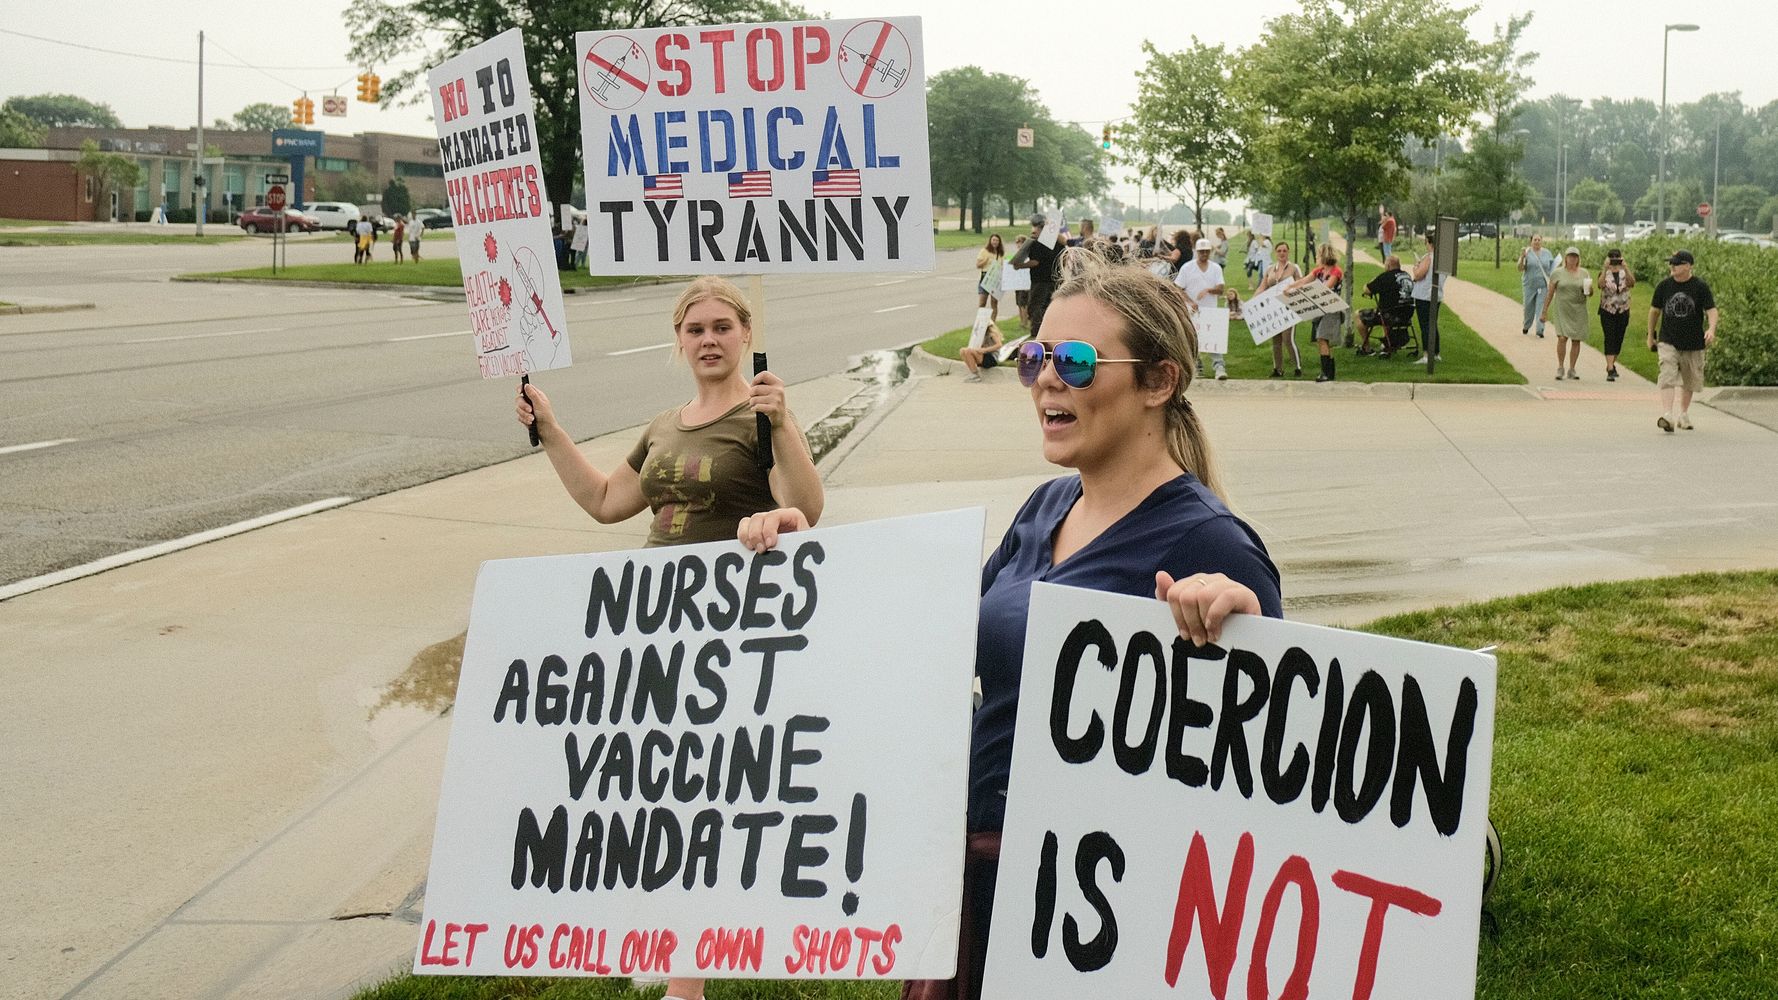 What You Need To Know About COVID-19 Vaccine Mandates Right Now